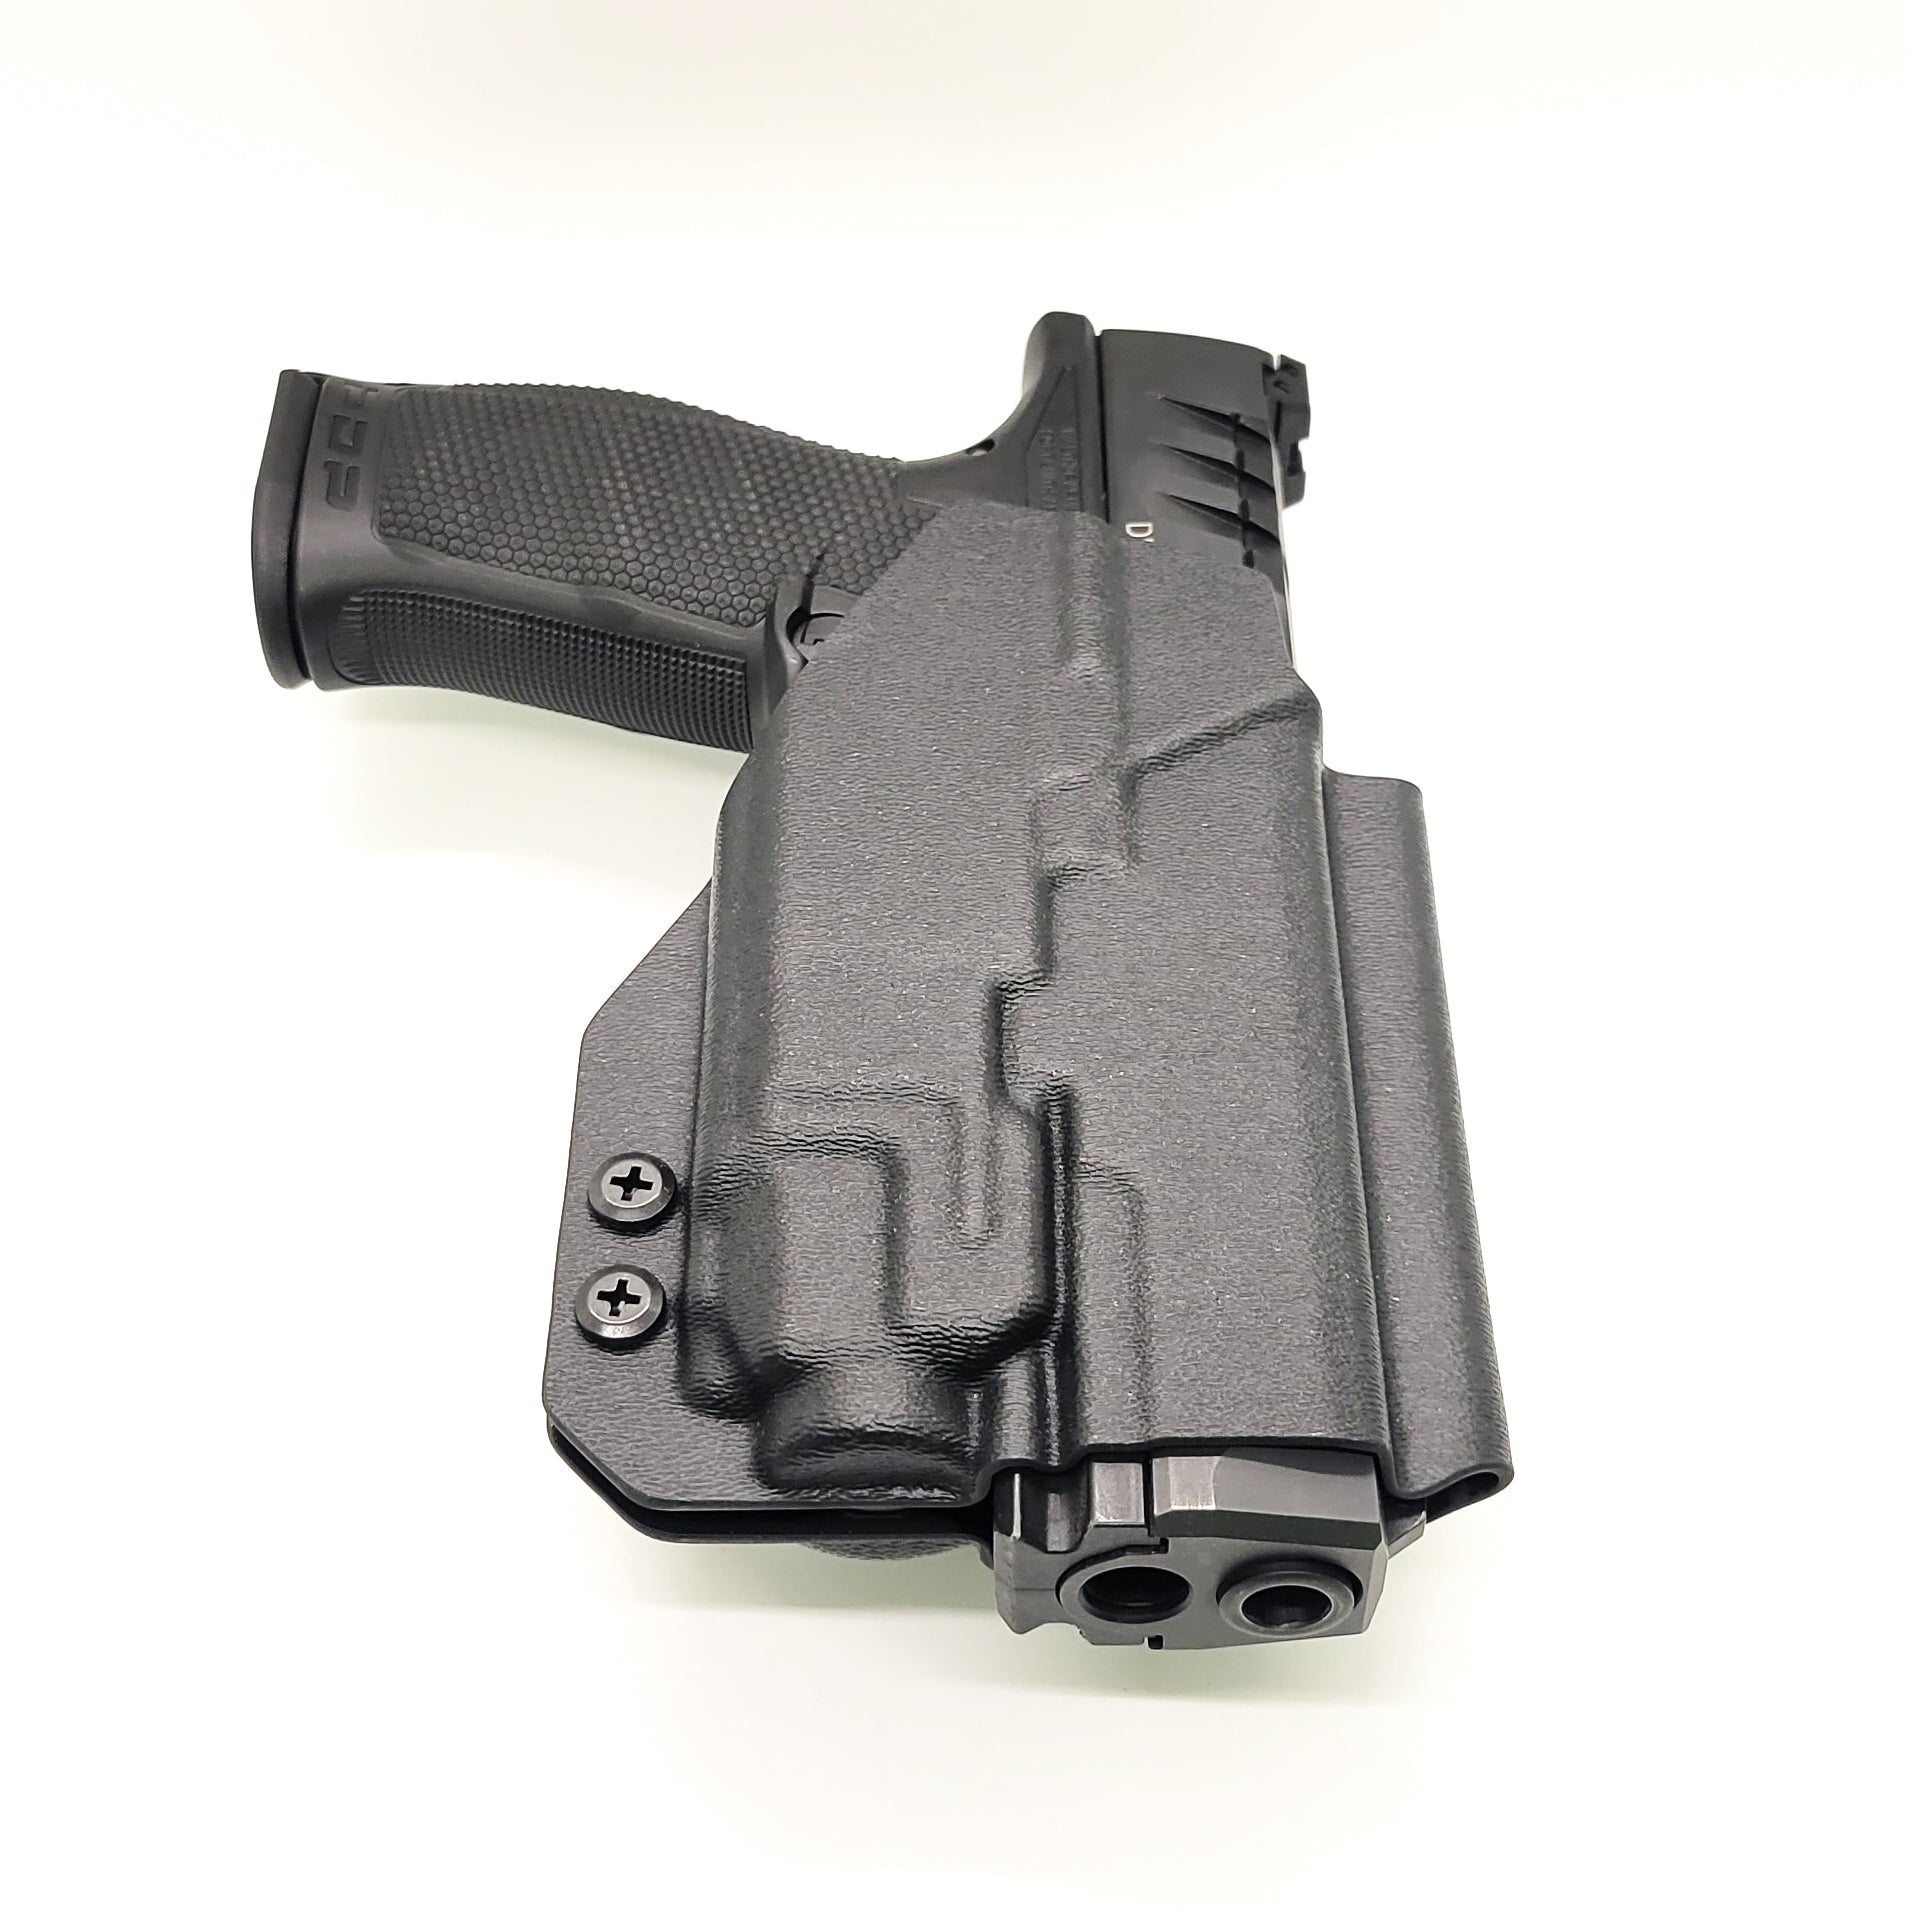 For the best OWB Outside Waistband Taco Style Holster designed to fit the Walther PDP Compact 4" pistol with the Streamlight TLR-8 mounted on the firearm, shop Four Brothers Holsters. Cut for red dot sight, full sweat guard, adjustable retention & open muzzle for threaded barrels & compensators.